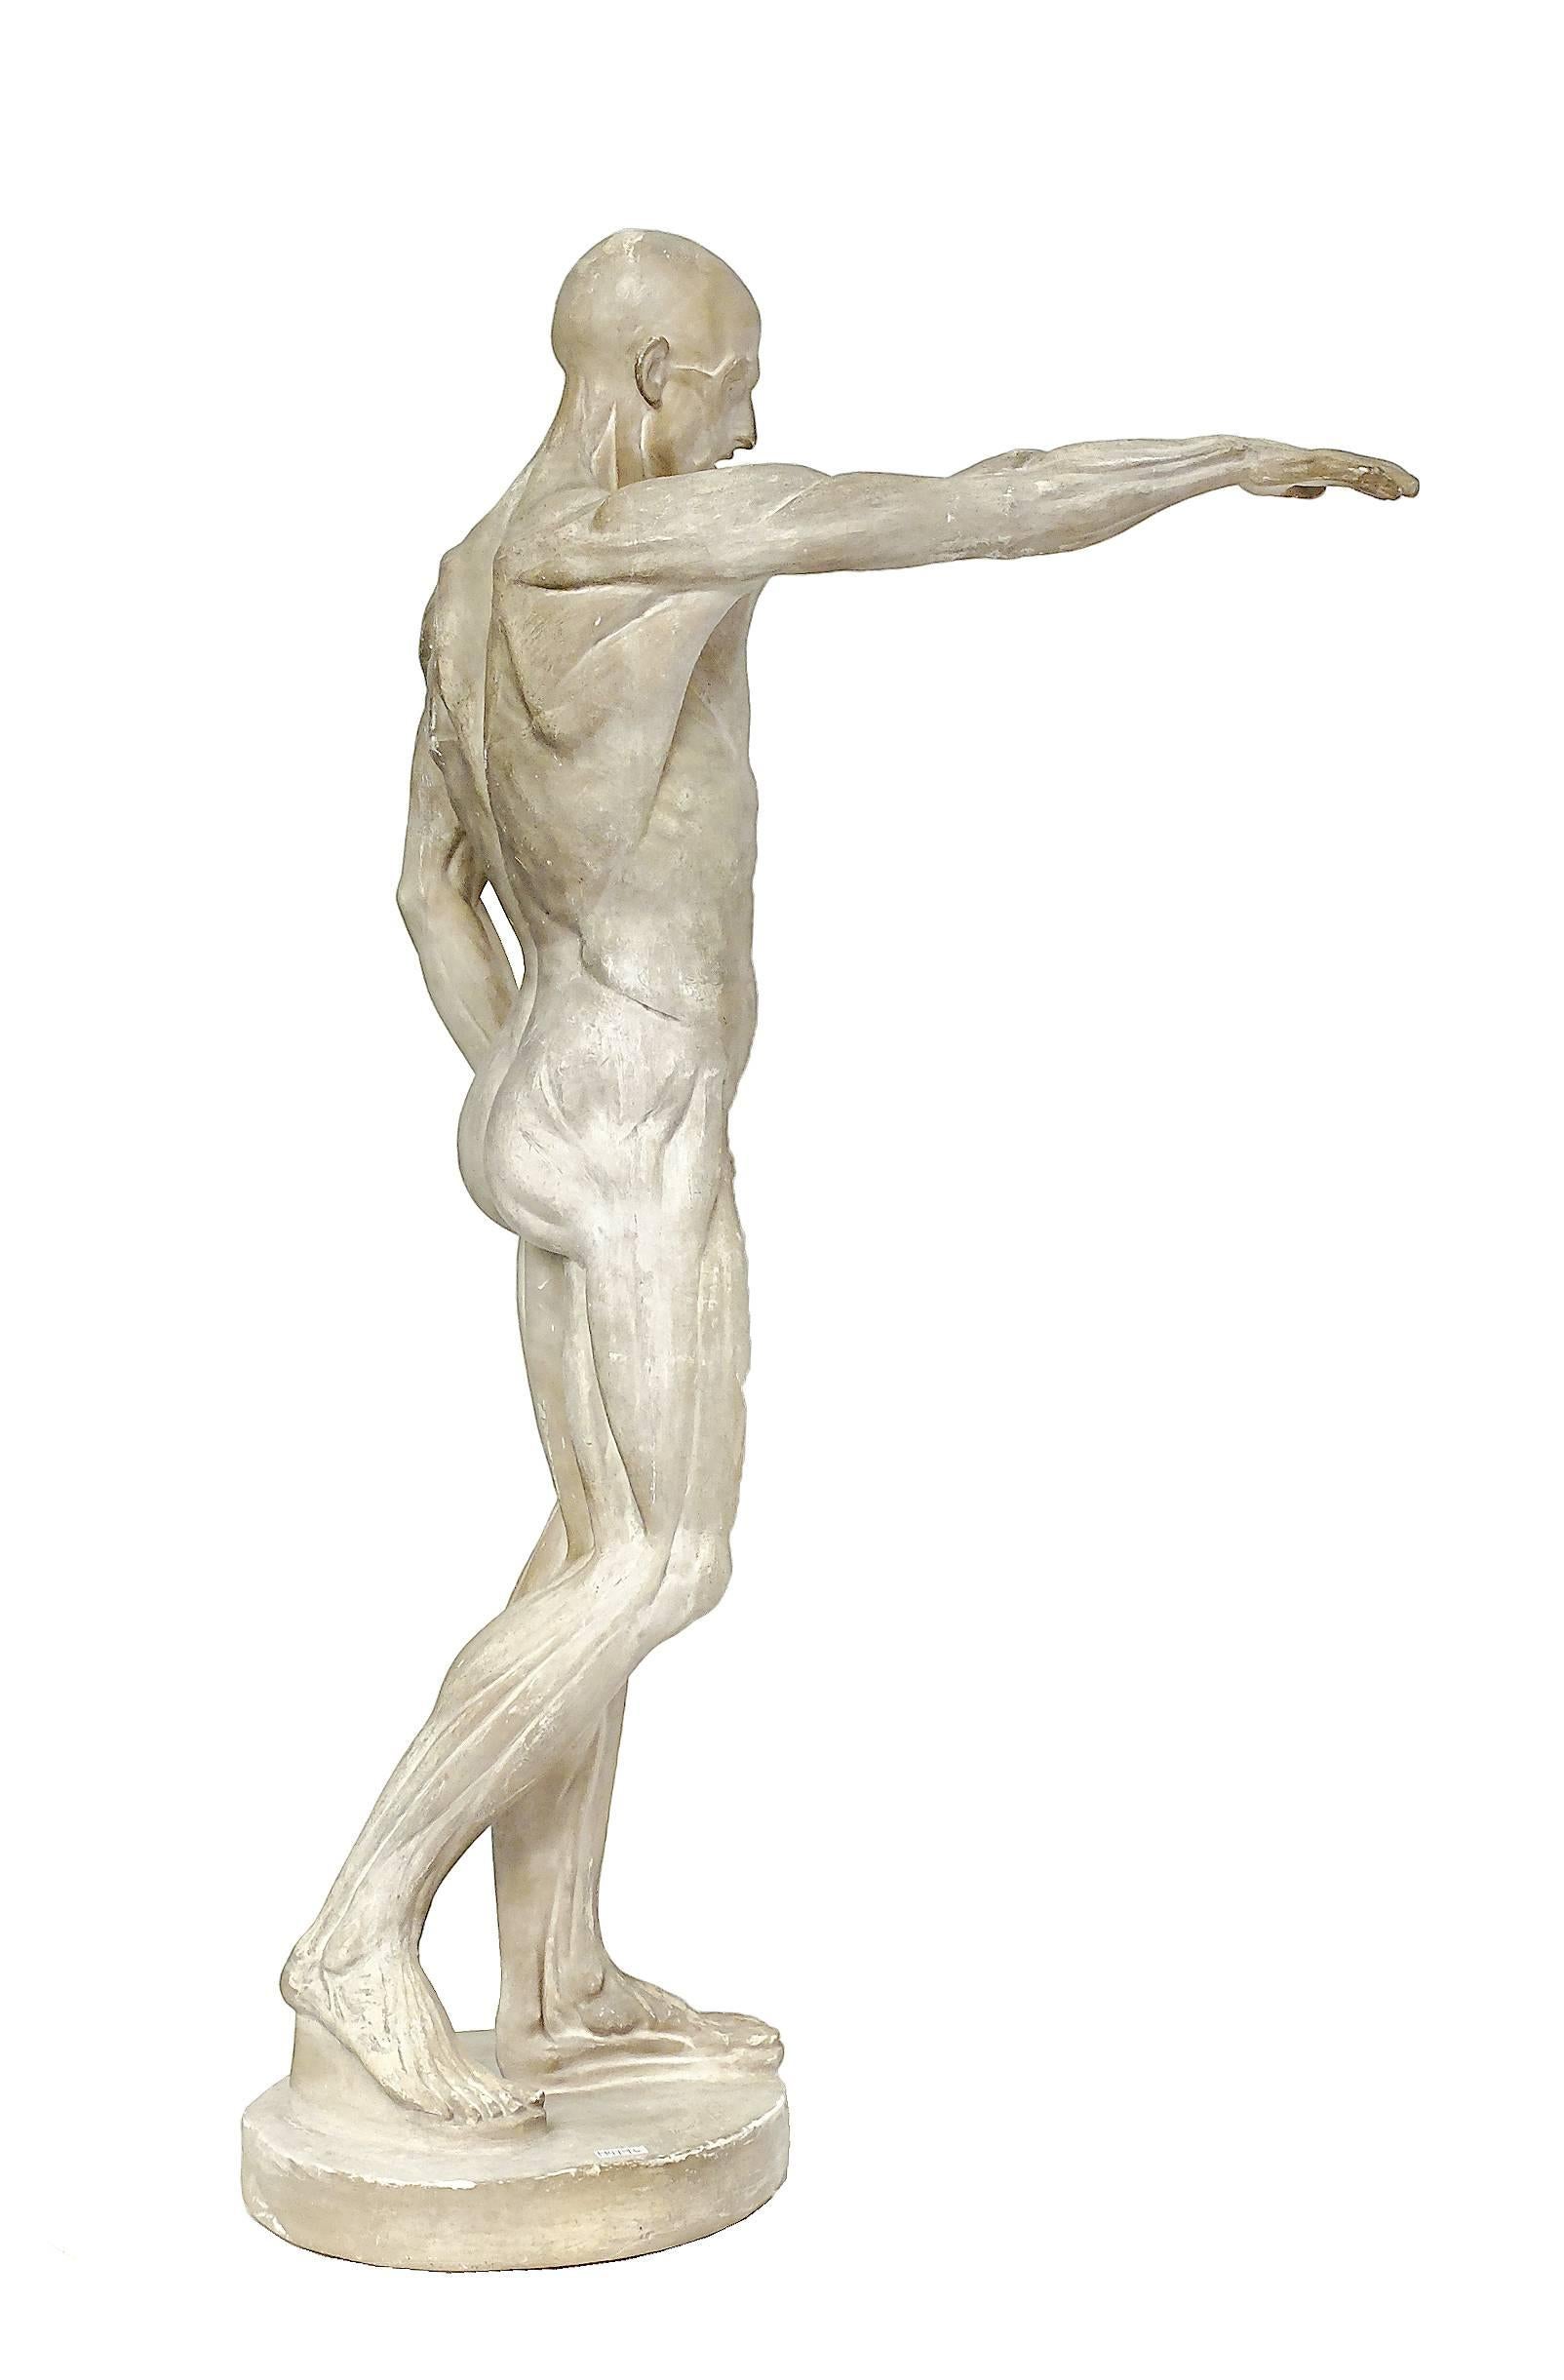 The anatomical sculpture, cast depicts a flayed man standing over a round base in a classical pose with lifted arm. Anatomical study purpose.
Italy, circa 1870.
 